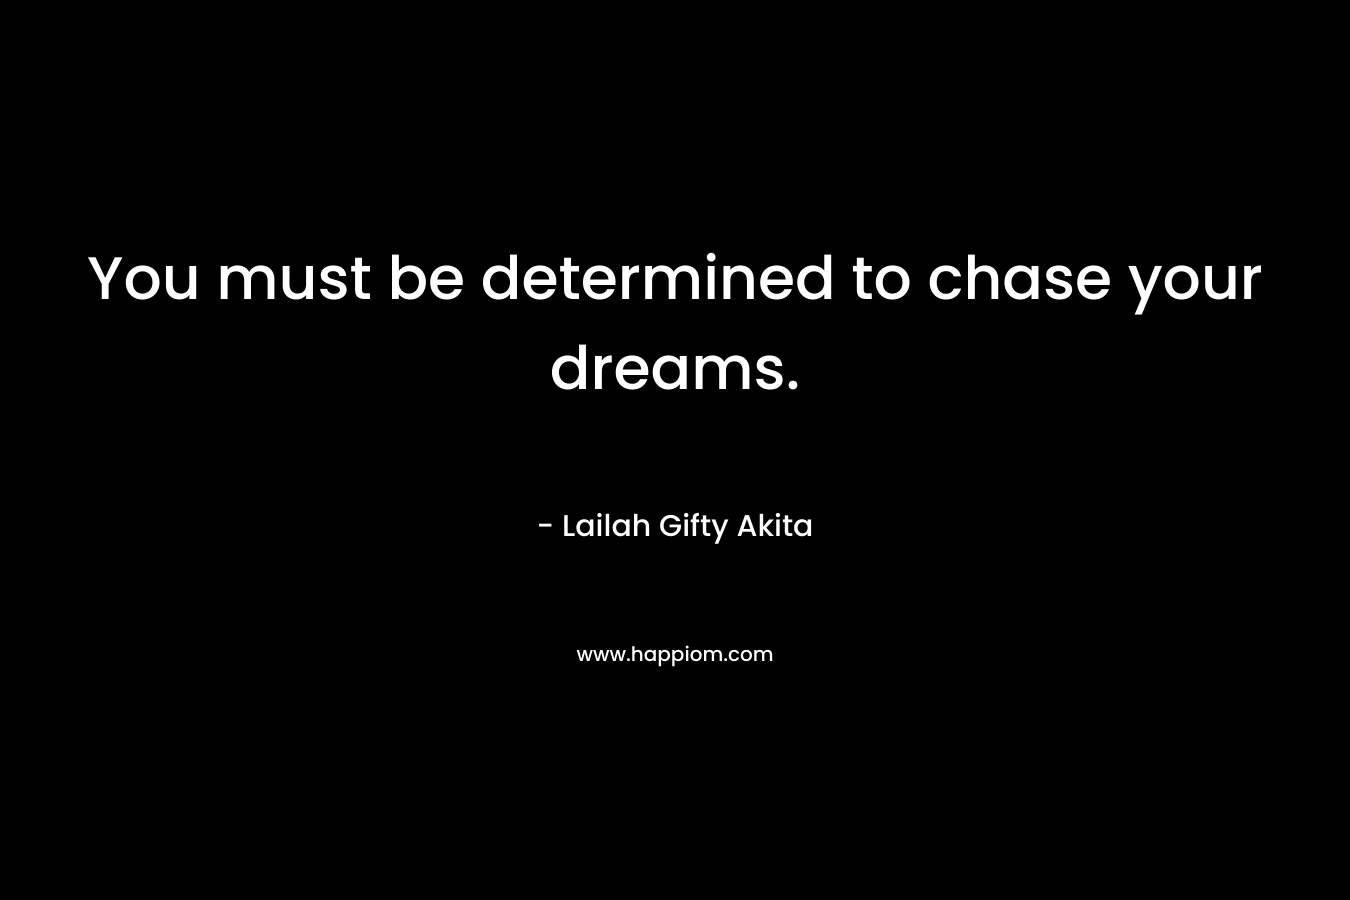 You must be determined to chase your dreams.